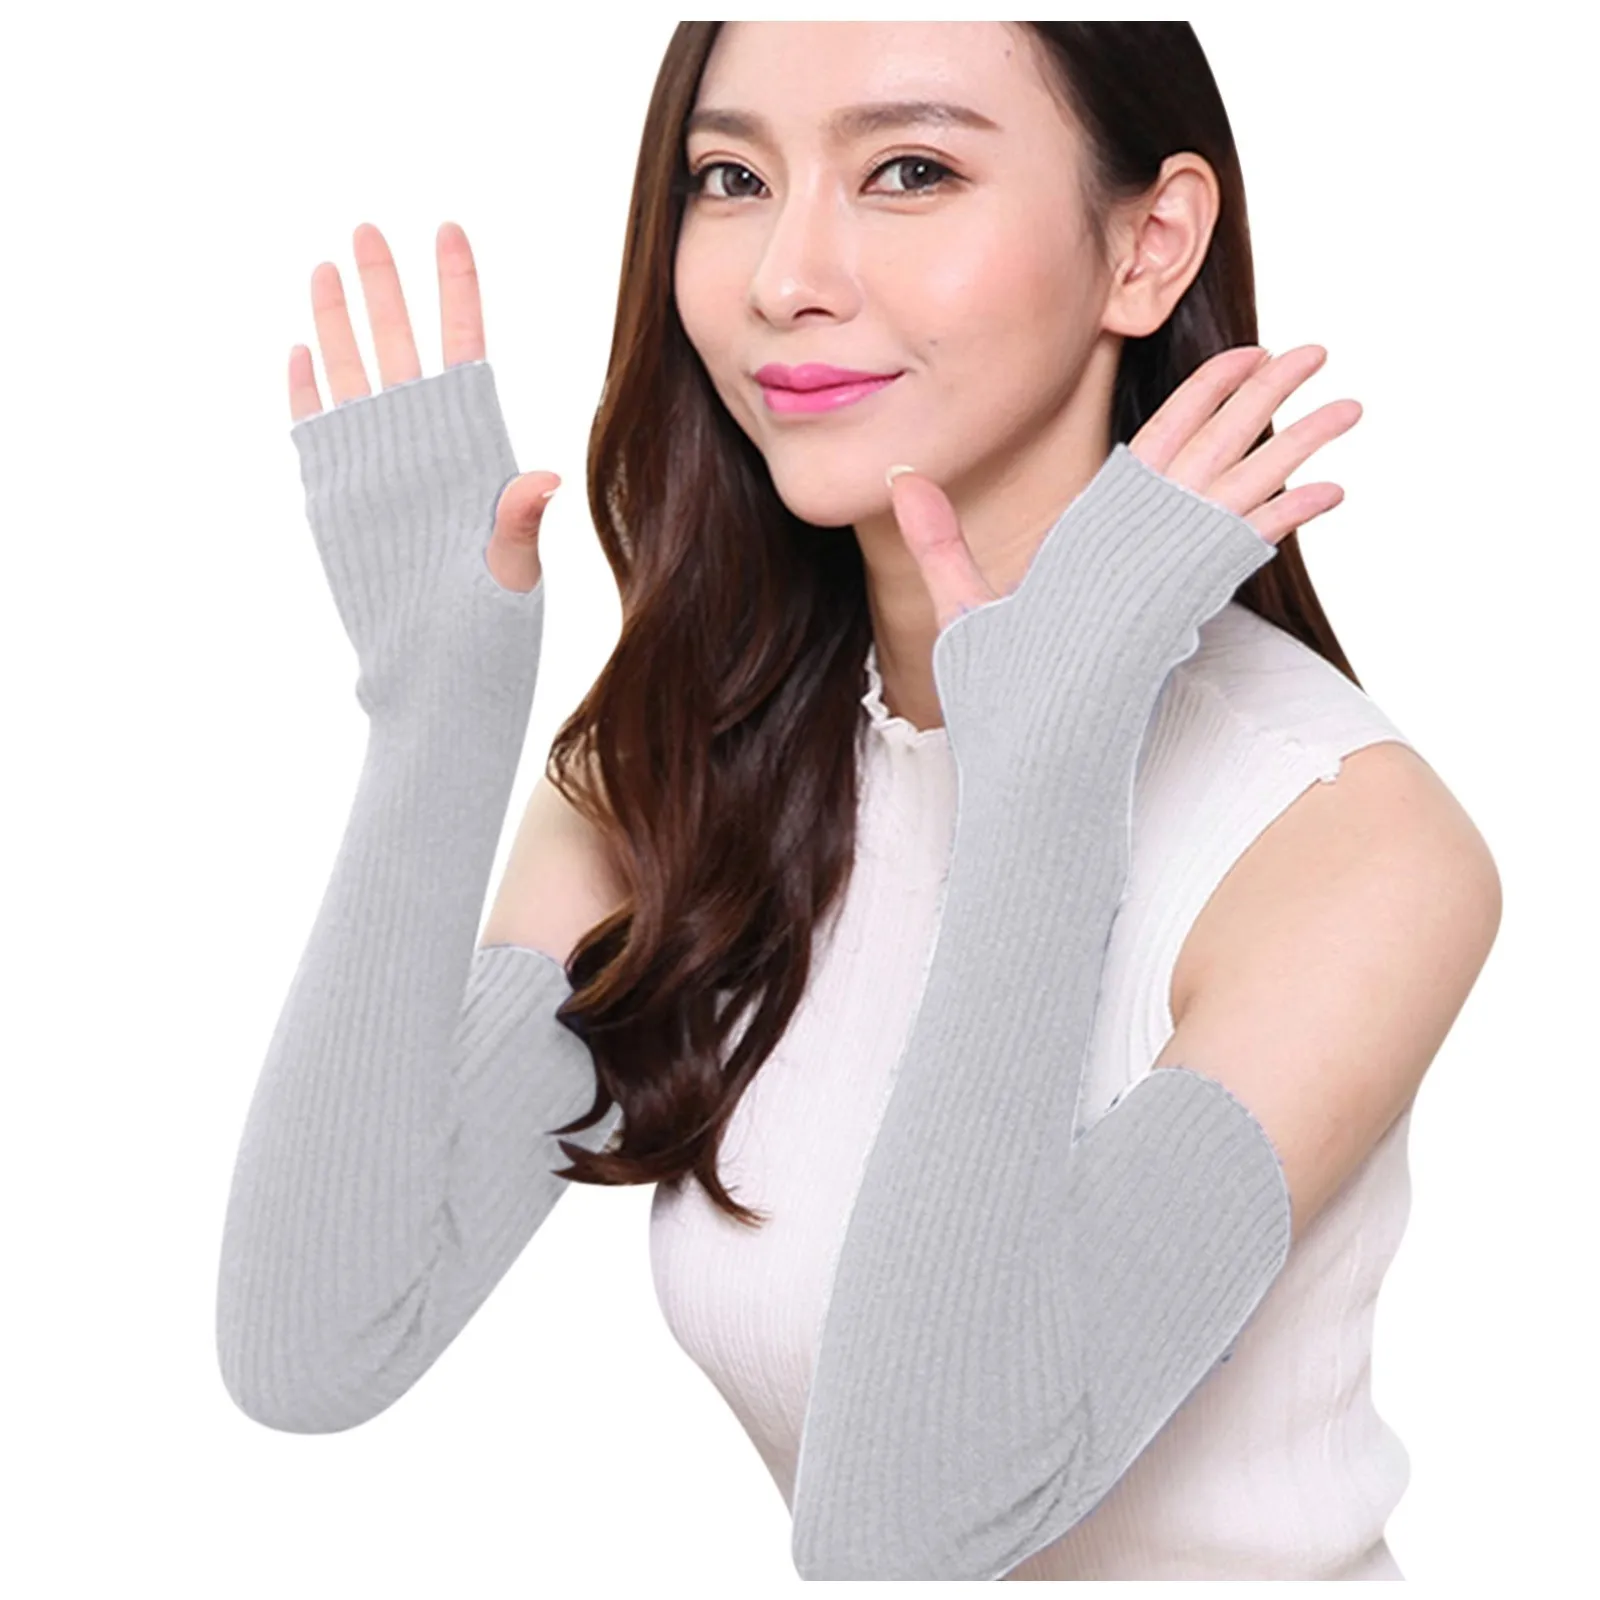 

JAYCOSIN Cashmere Blend Arm Warmer Fingerless Gloves For Women Knited Long Sleeve Mitten Gloves Wrist Warmer With Thumb Hole